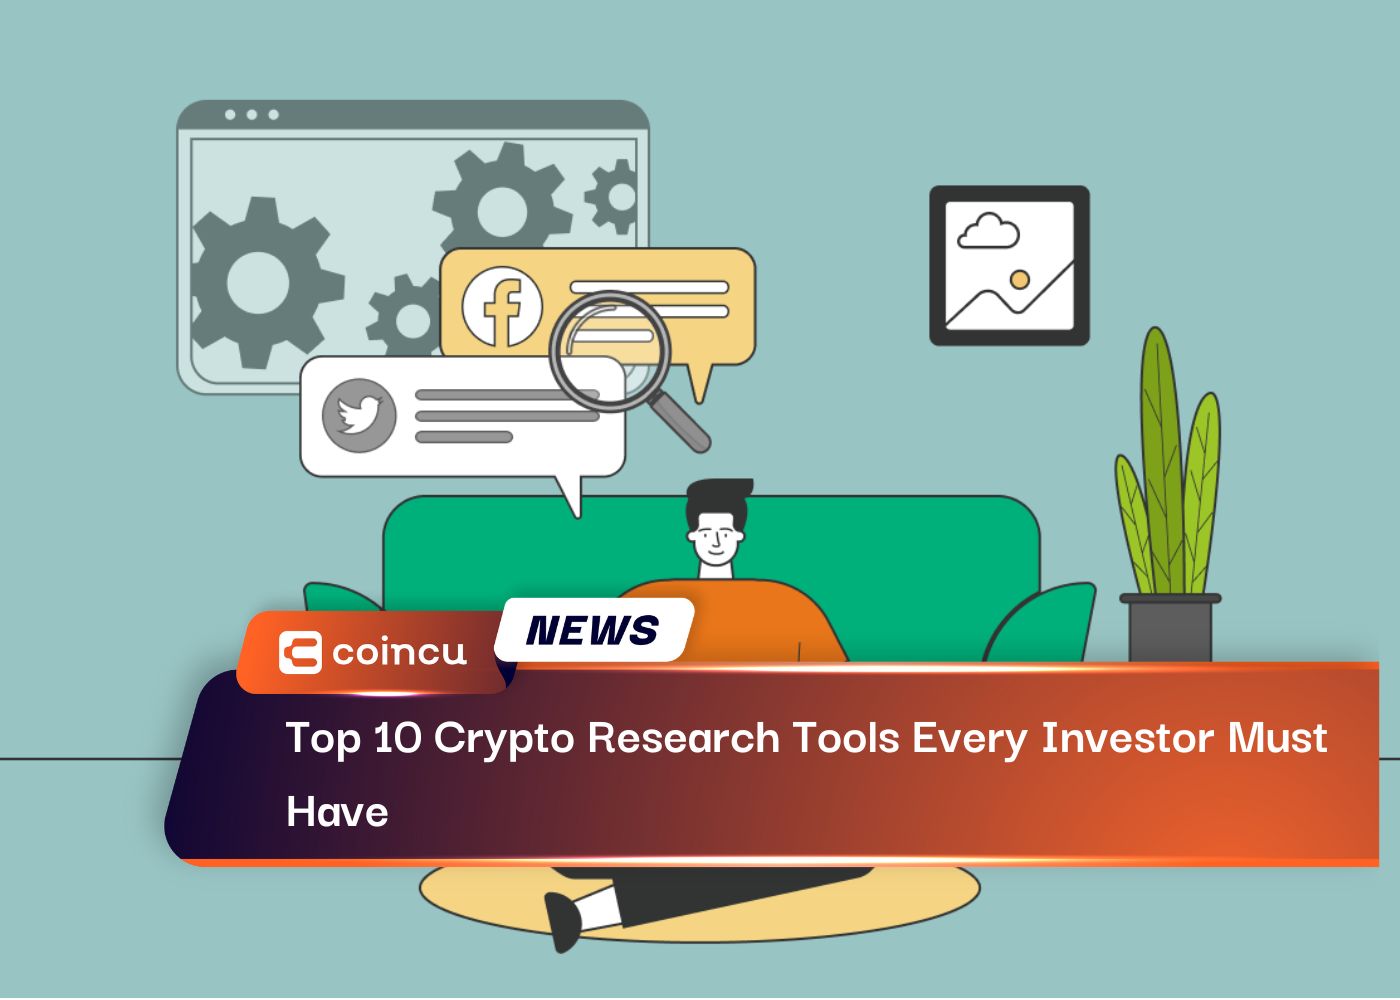 Top 10 Crypto Research Tools Every Investor Must Have